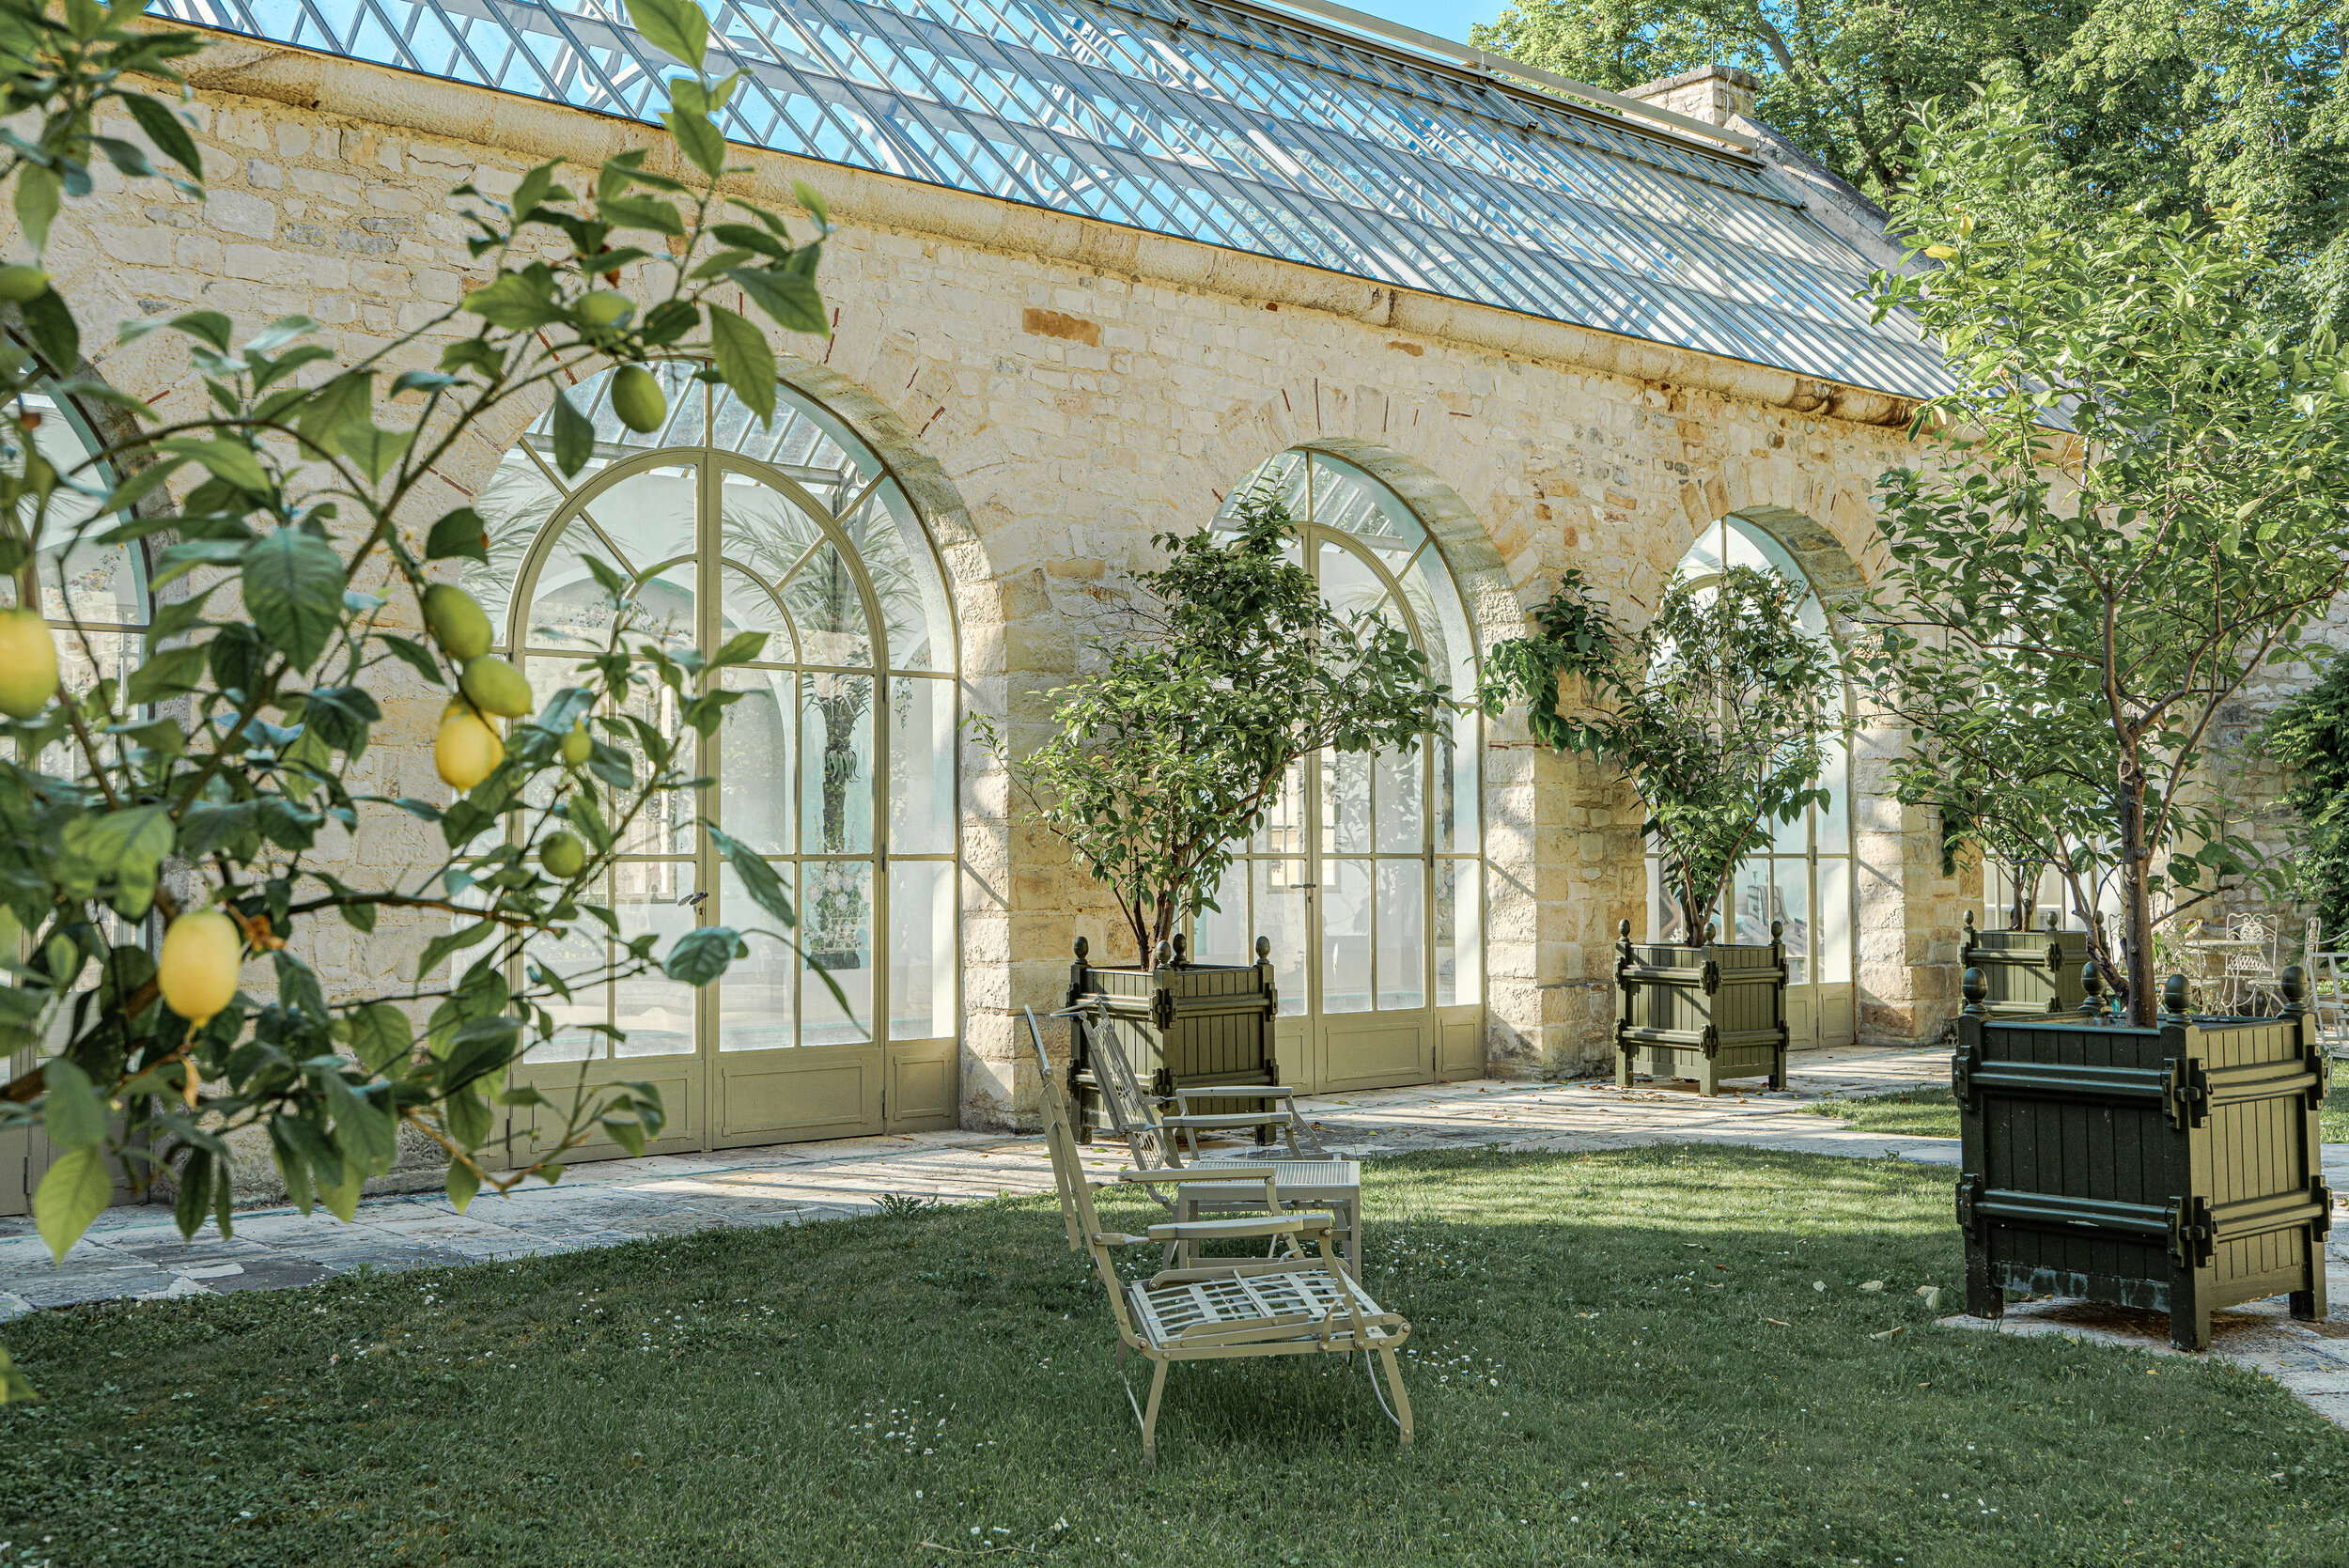 Domaine d'exception, Ile de France for your wedding in a typical château